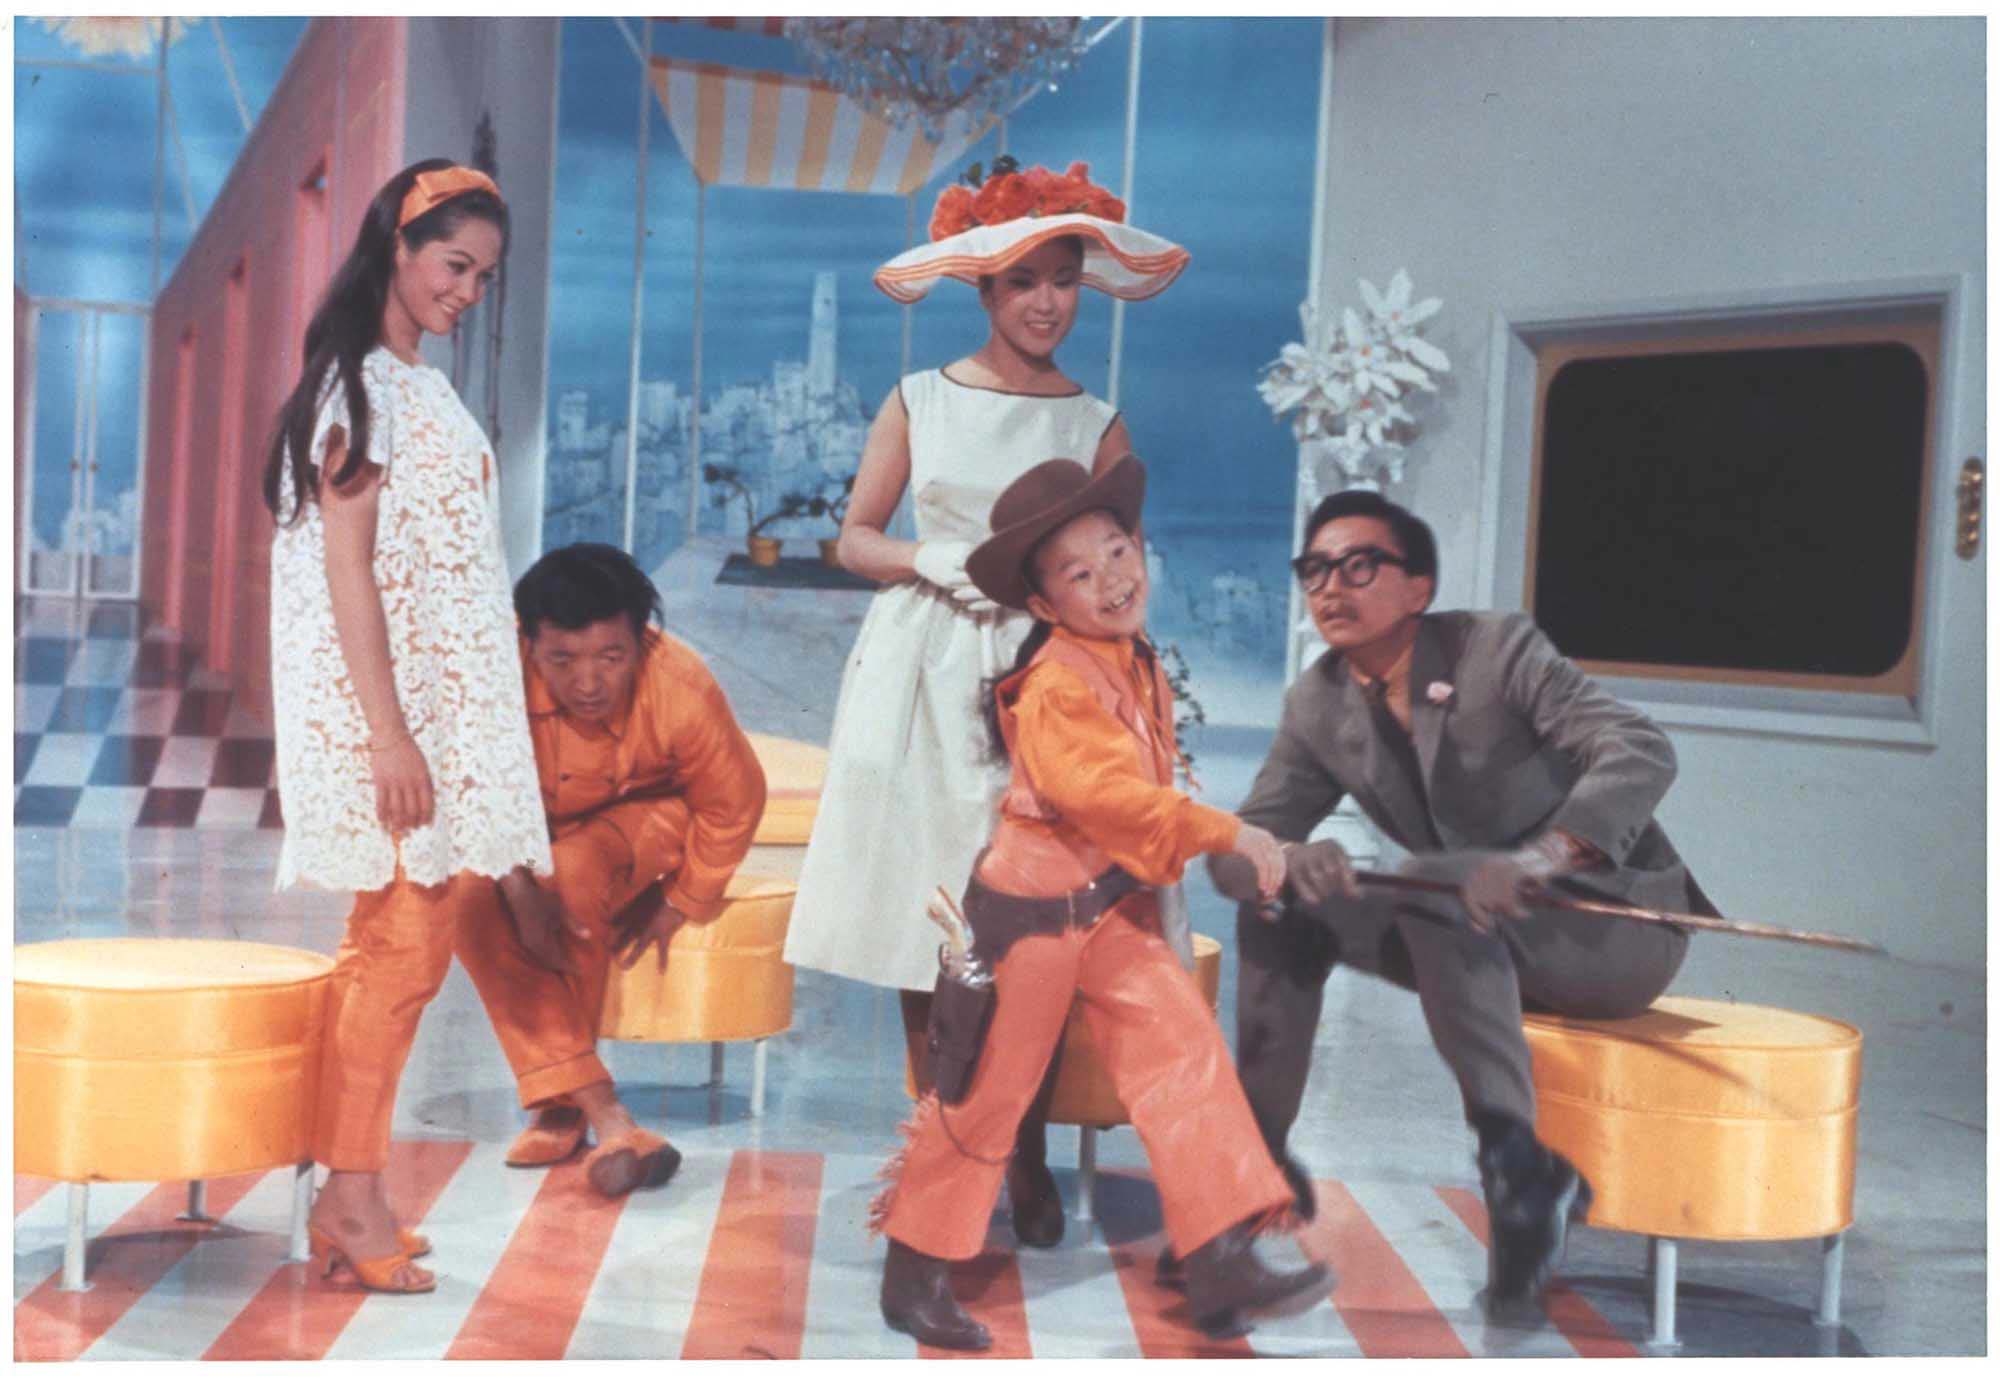 A photo from the 1961 film version of Flower Drum Song.